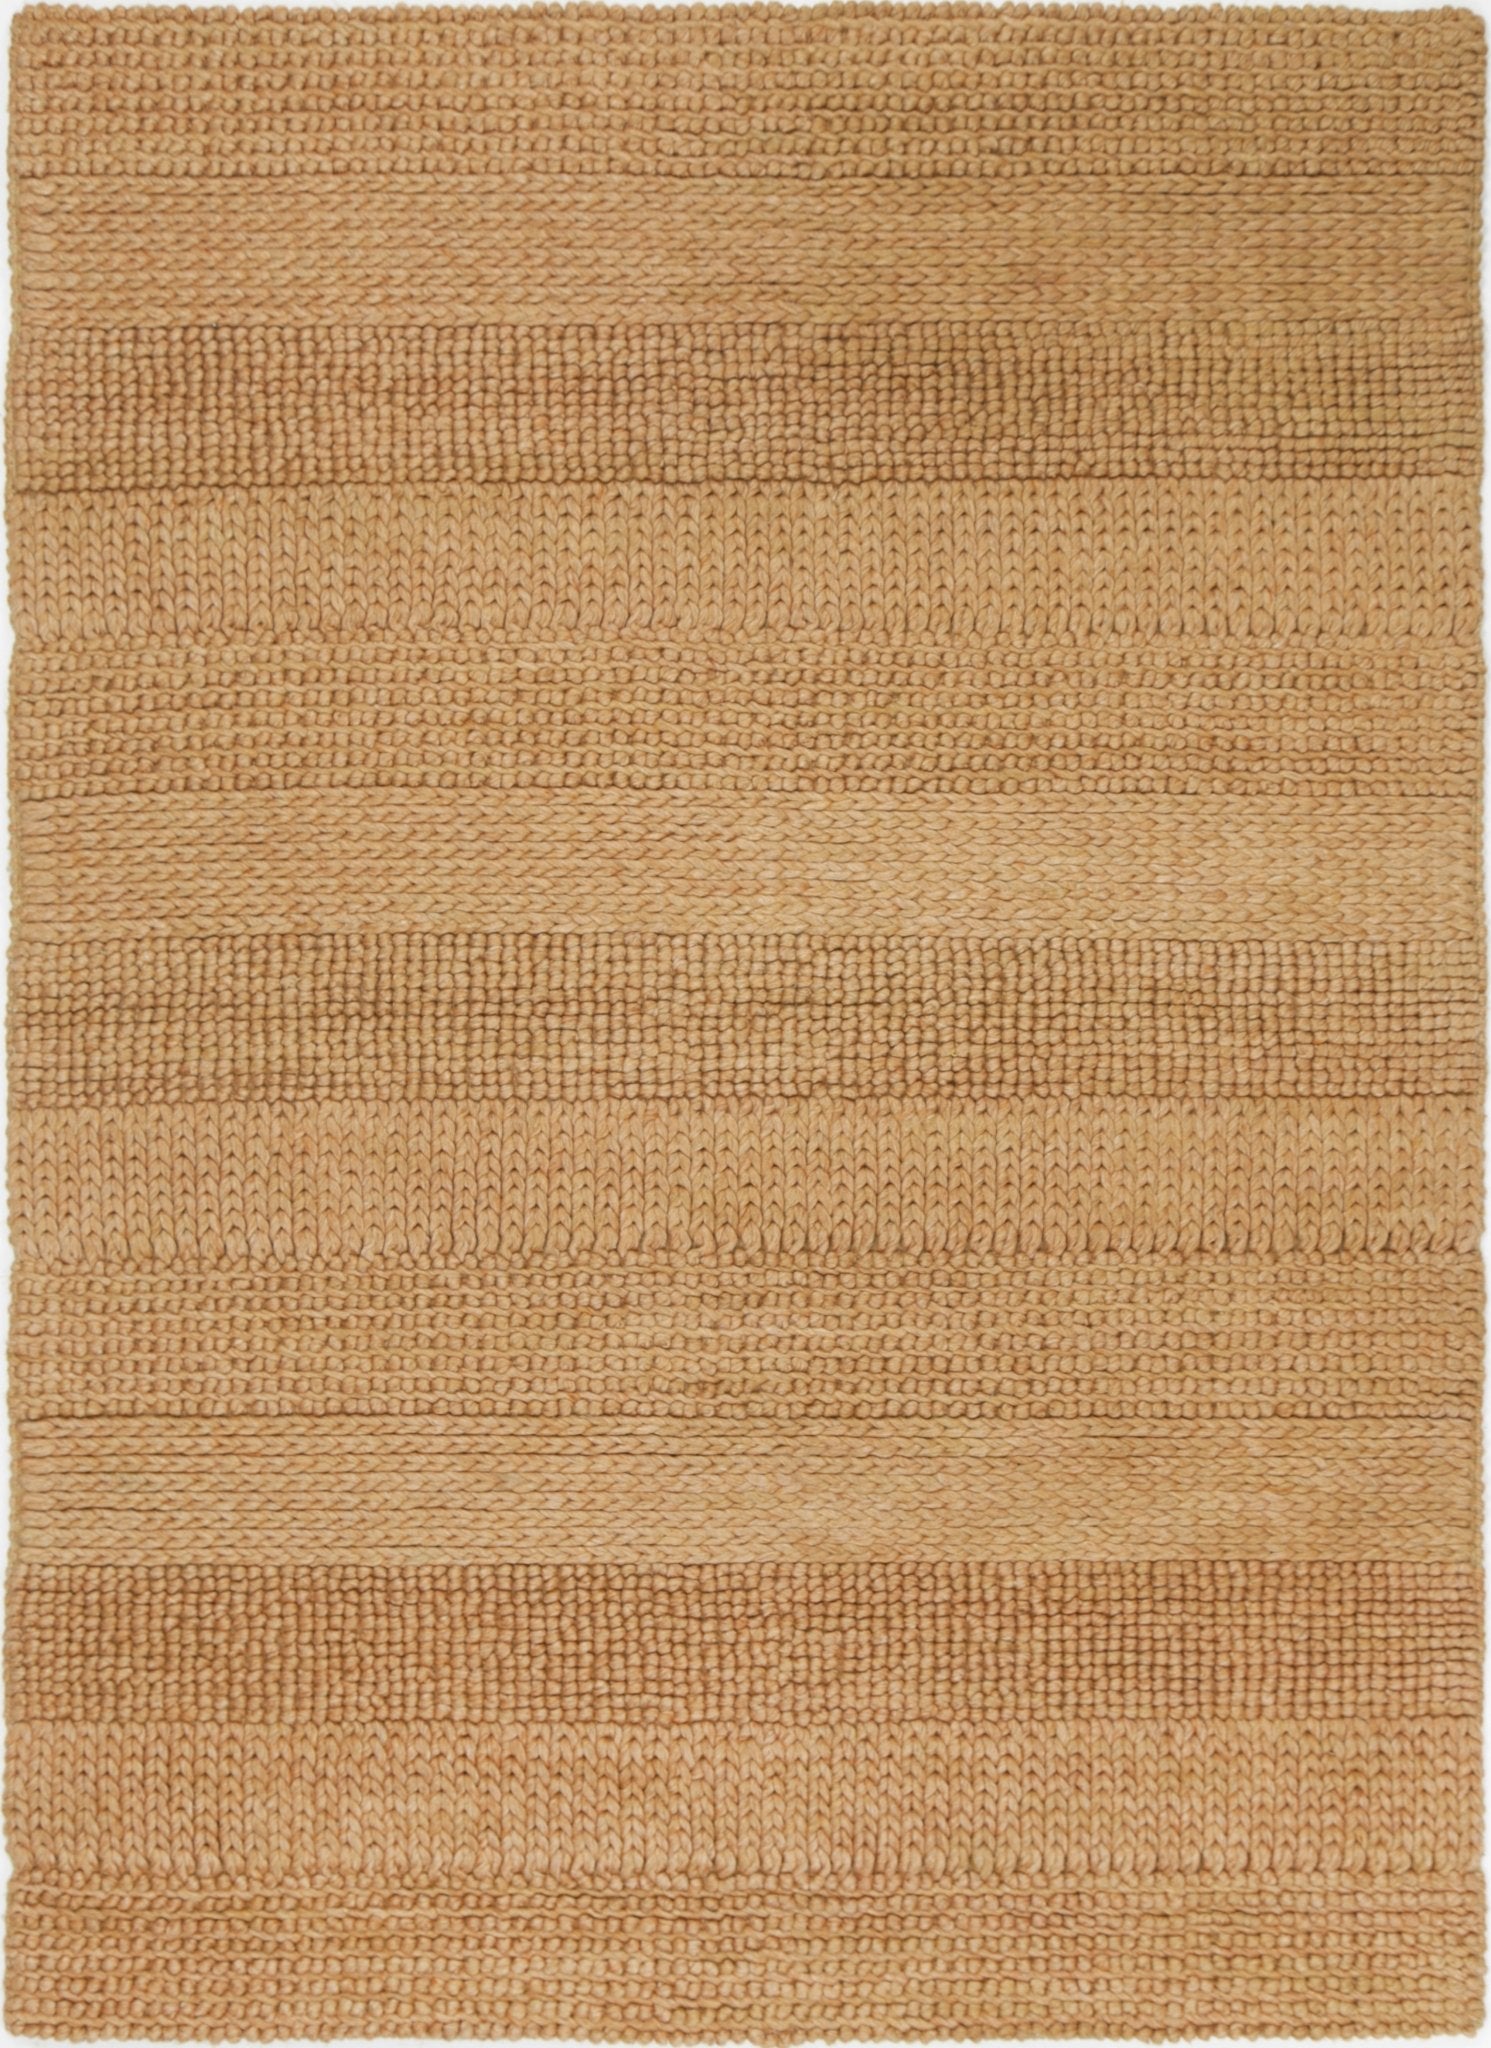 Rayna Grace Copper Wool Blend Rug - Area Rug - Rugs a Million